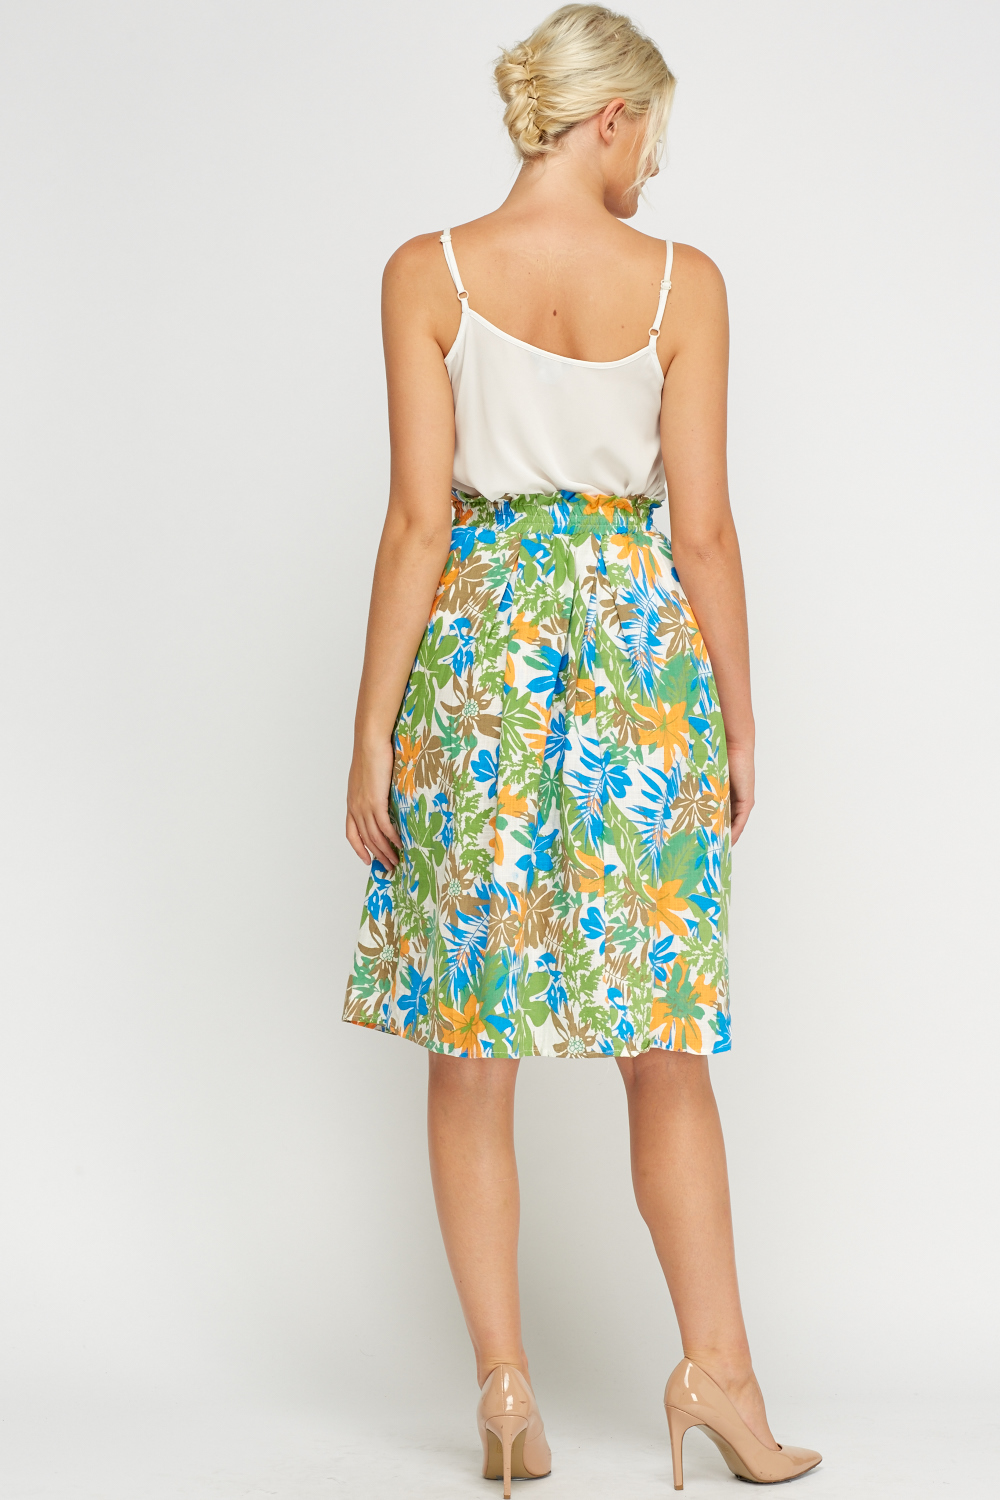 Box Pleated Floral Skirt - Just $6